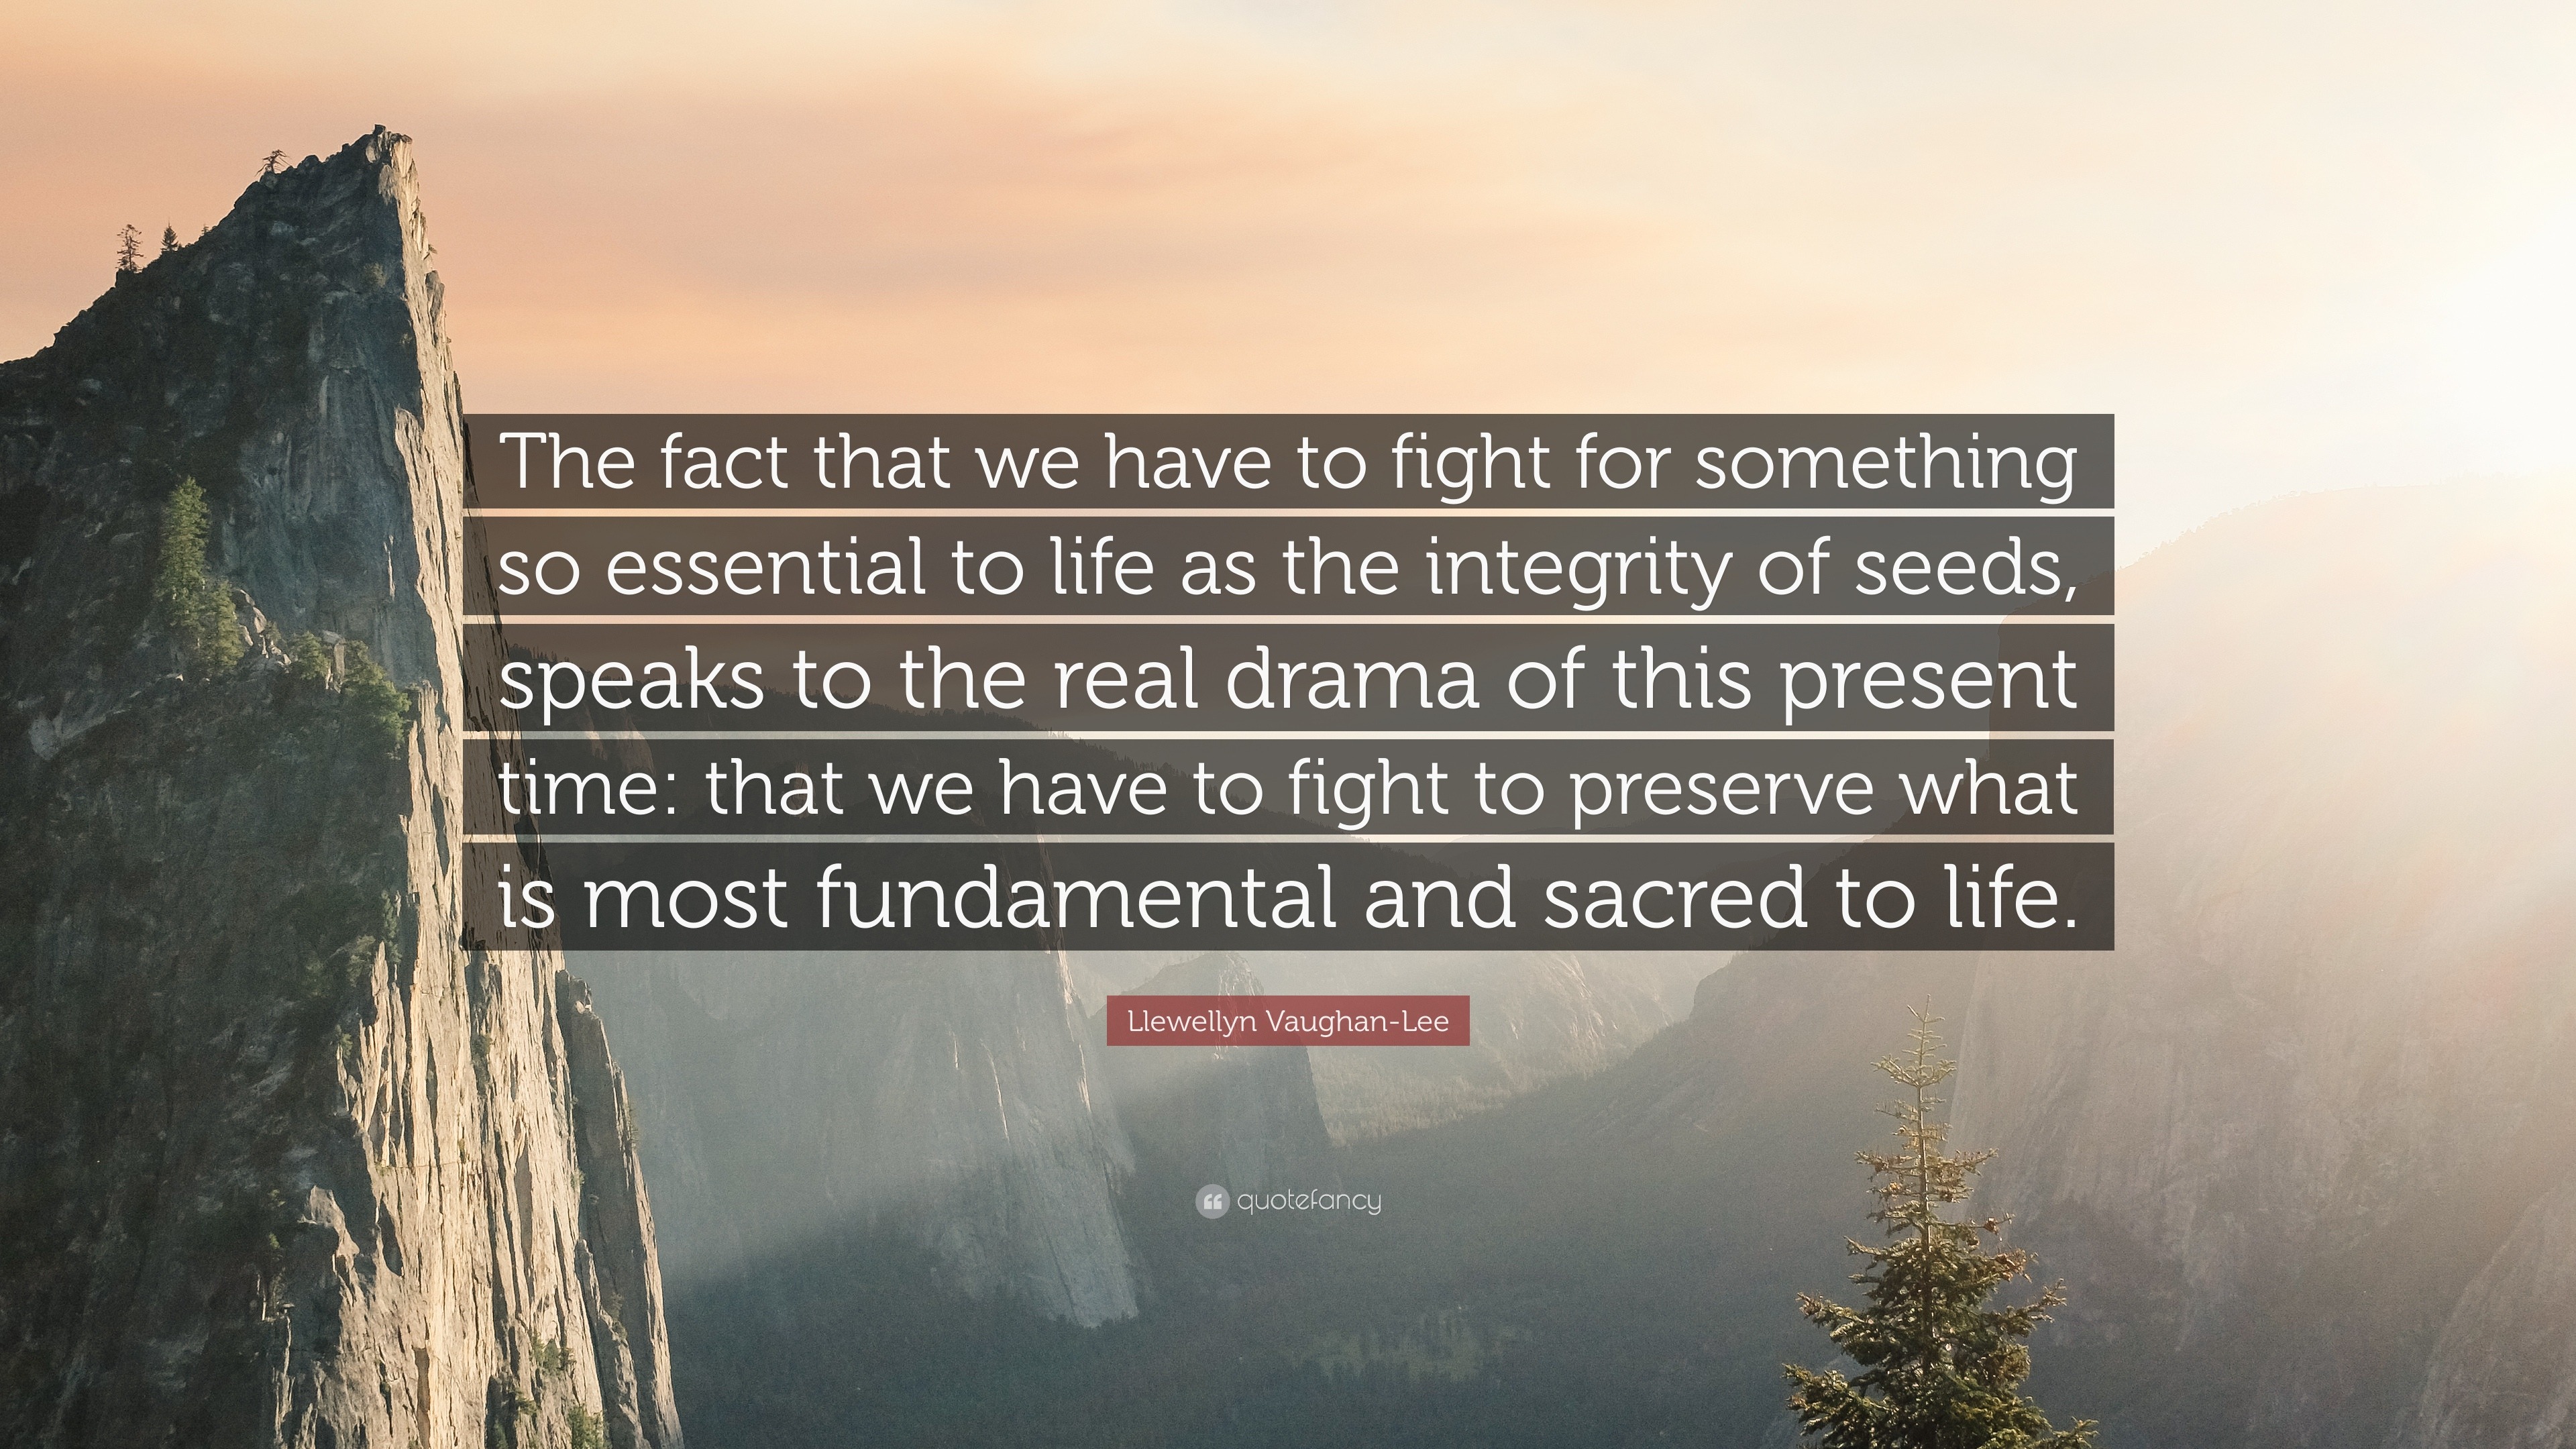 Llewellyn Vaughan-Lee Quote: “The fact that we have to fight for something  so essential to life as the integrity of seeds, speaks to the real drama  of...”